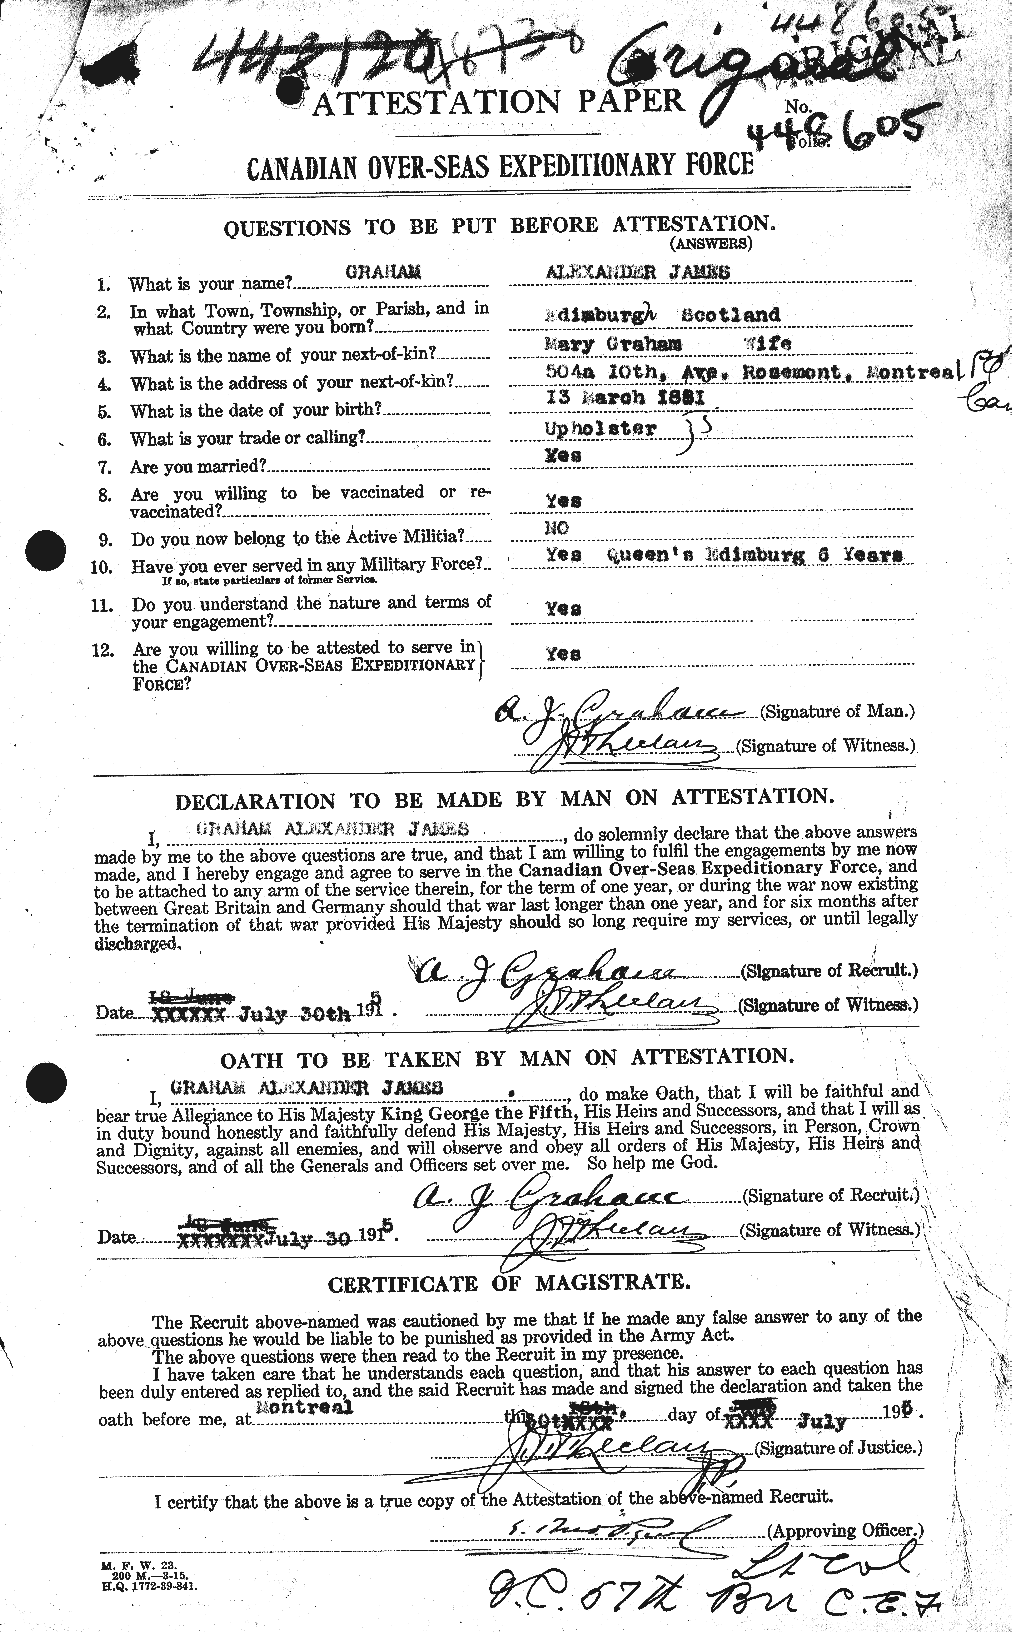 Personnel Records of the First World War - CEF 359591a